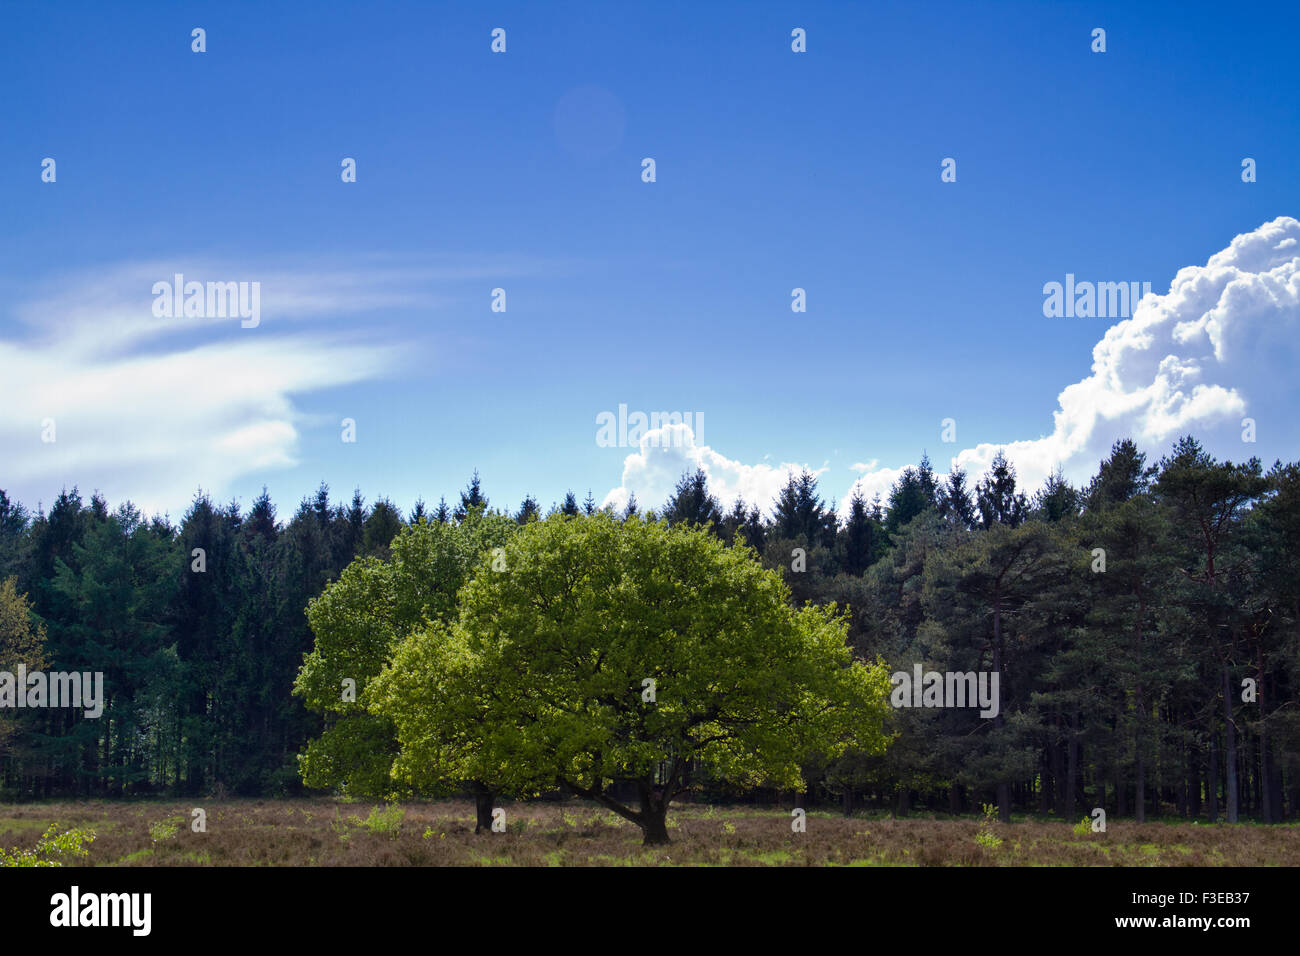 Springtime: Oak tree with fresh green leaves, in the background a dark pine forest Stock Photo